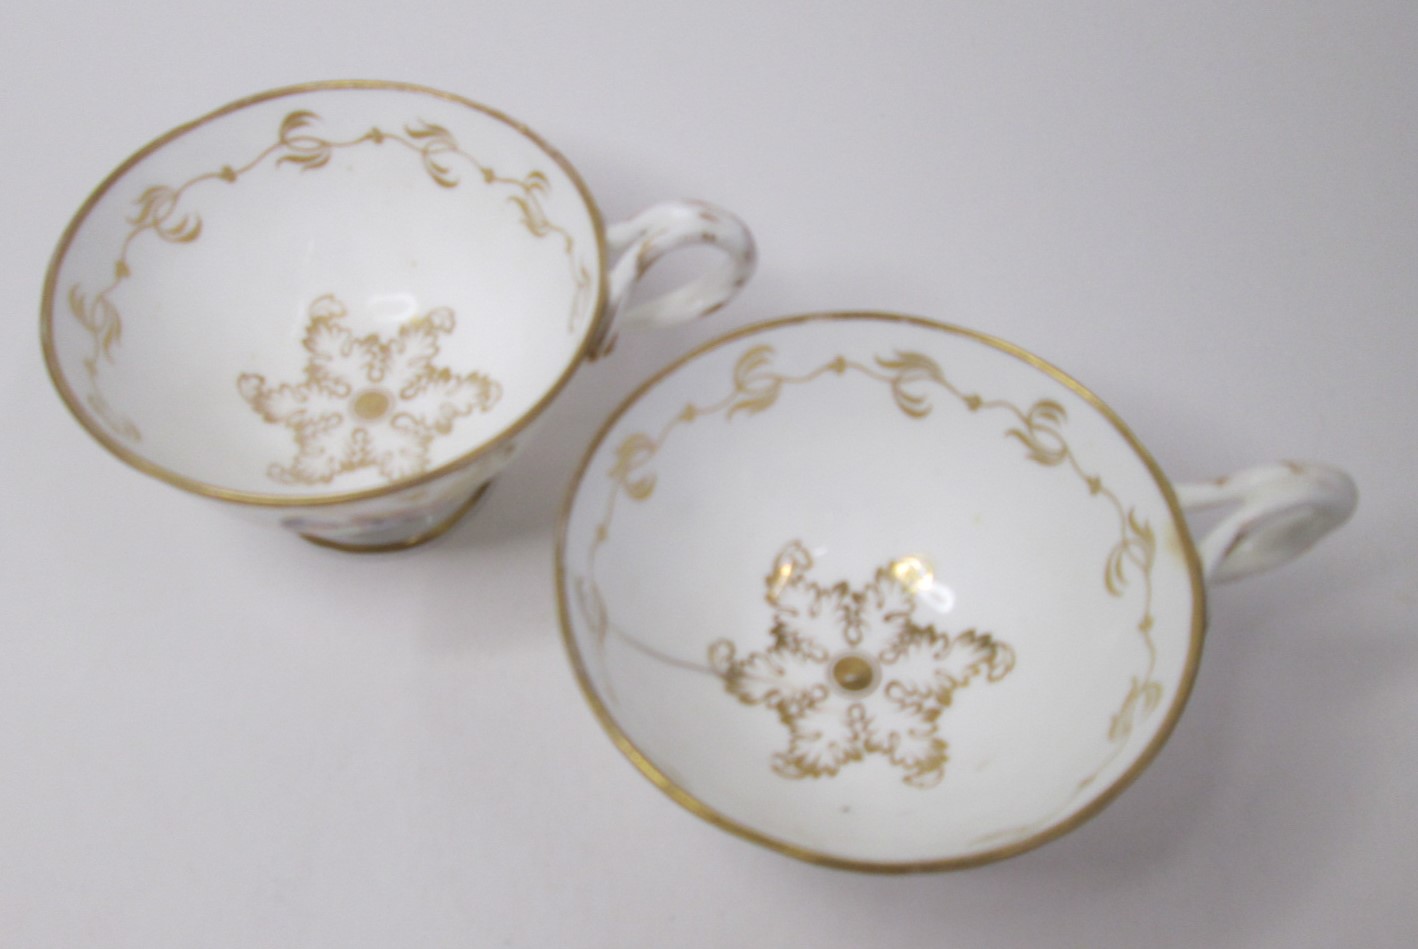 Two teacups hand painted with exotic birds in flight,  pattern 3/608 by John Randall attributed to - Image 2 of 4